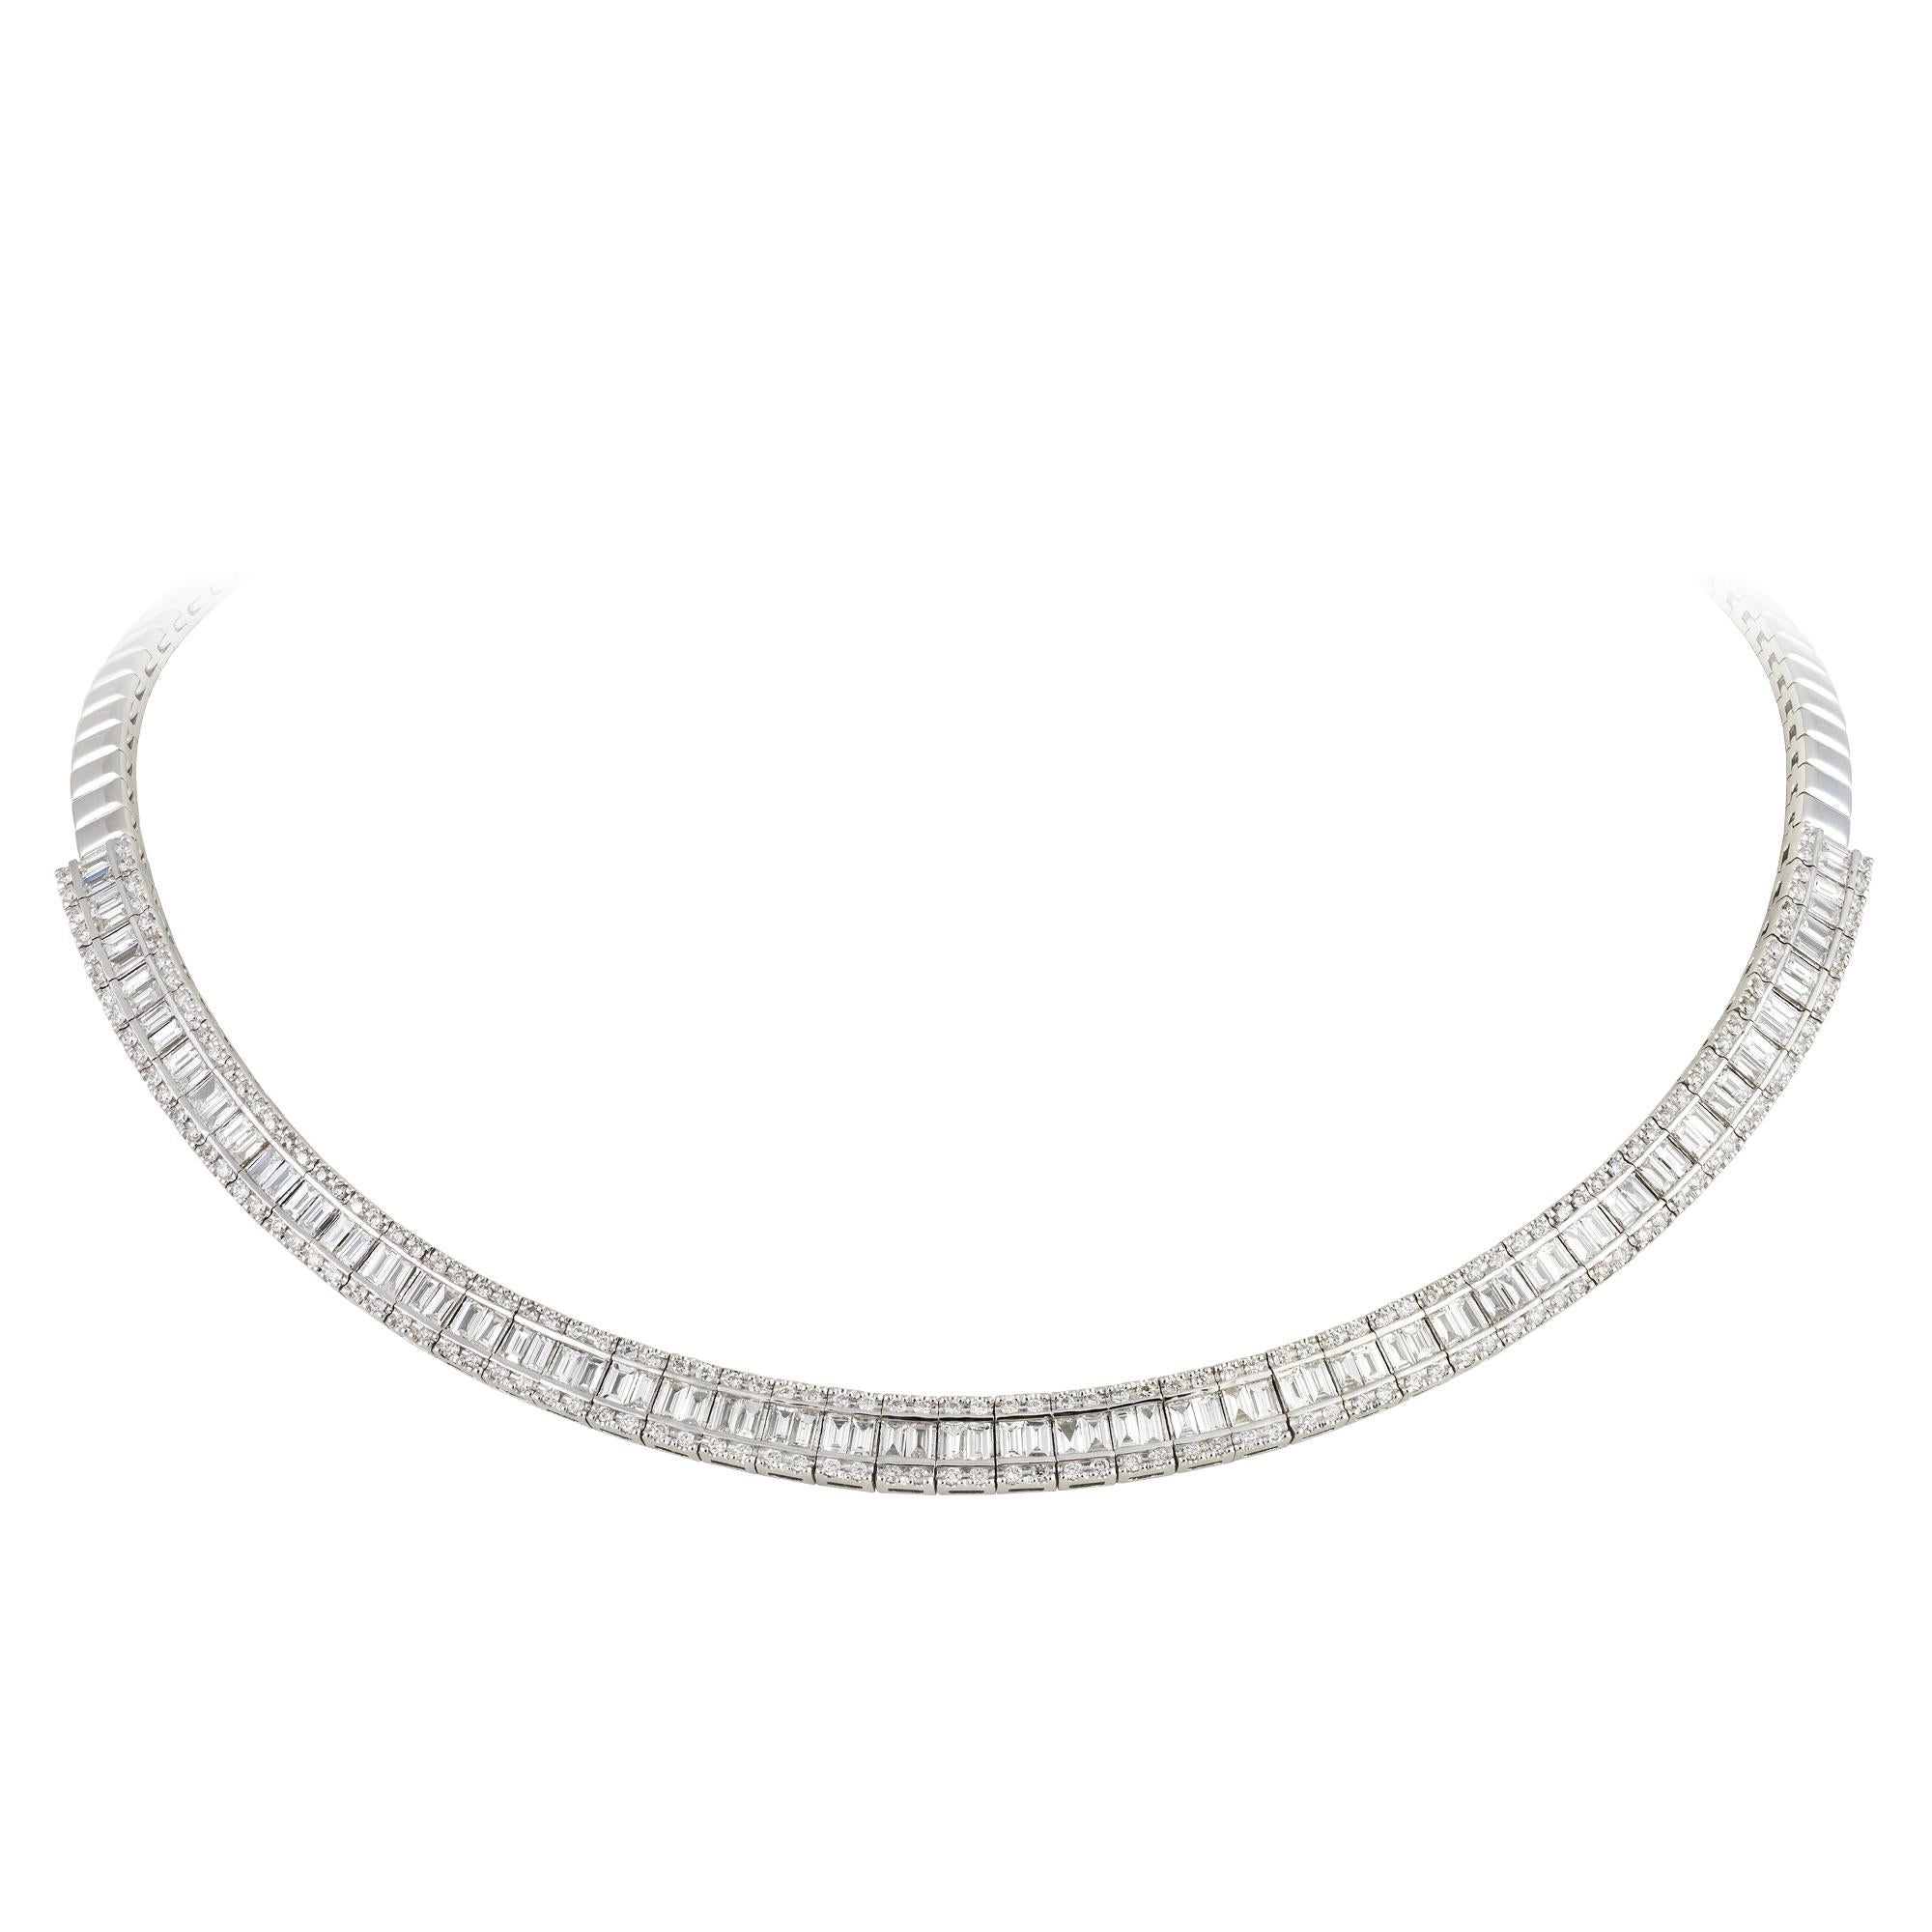 NECKLACE 18K White Gold Diamond 1.82 Cts/180 Pcs Tapered Baguette 5.01 Cts/90 Pcs
